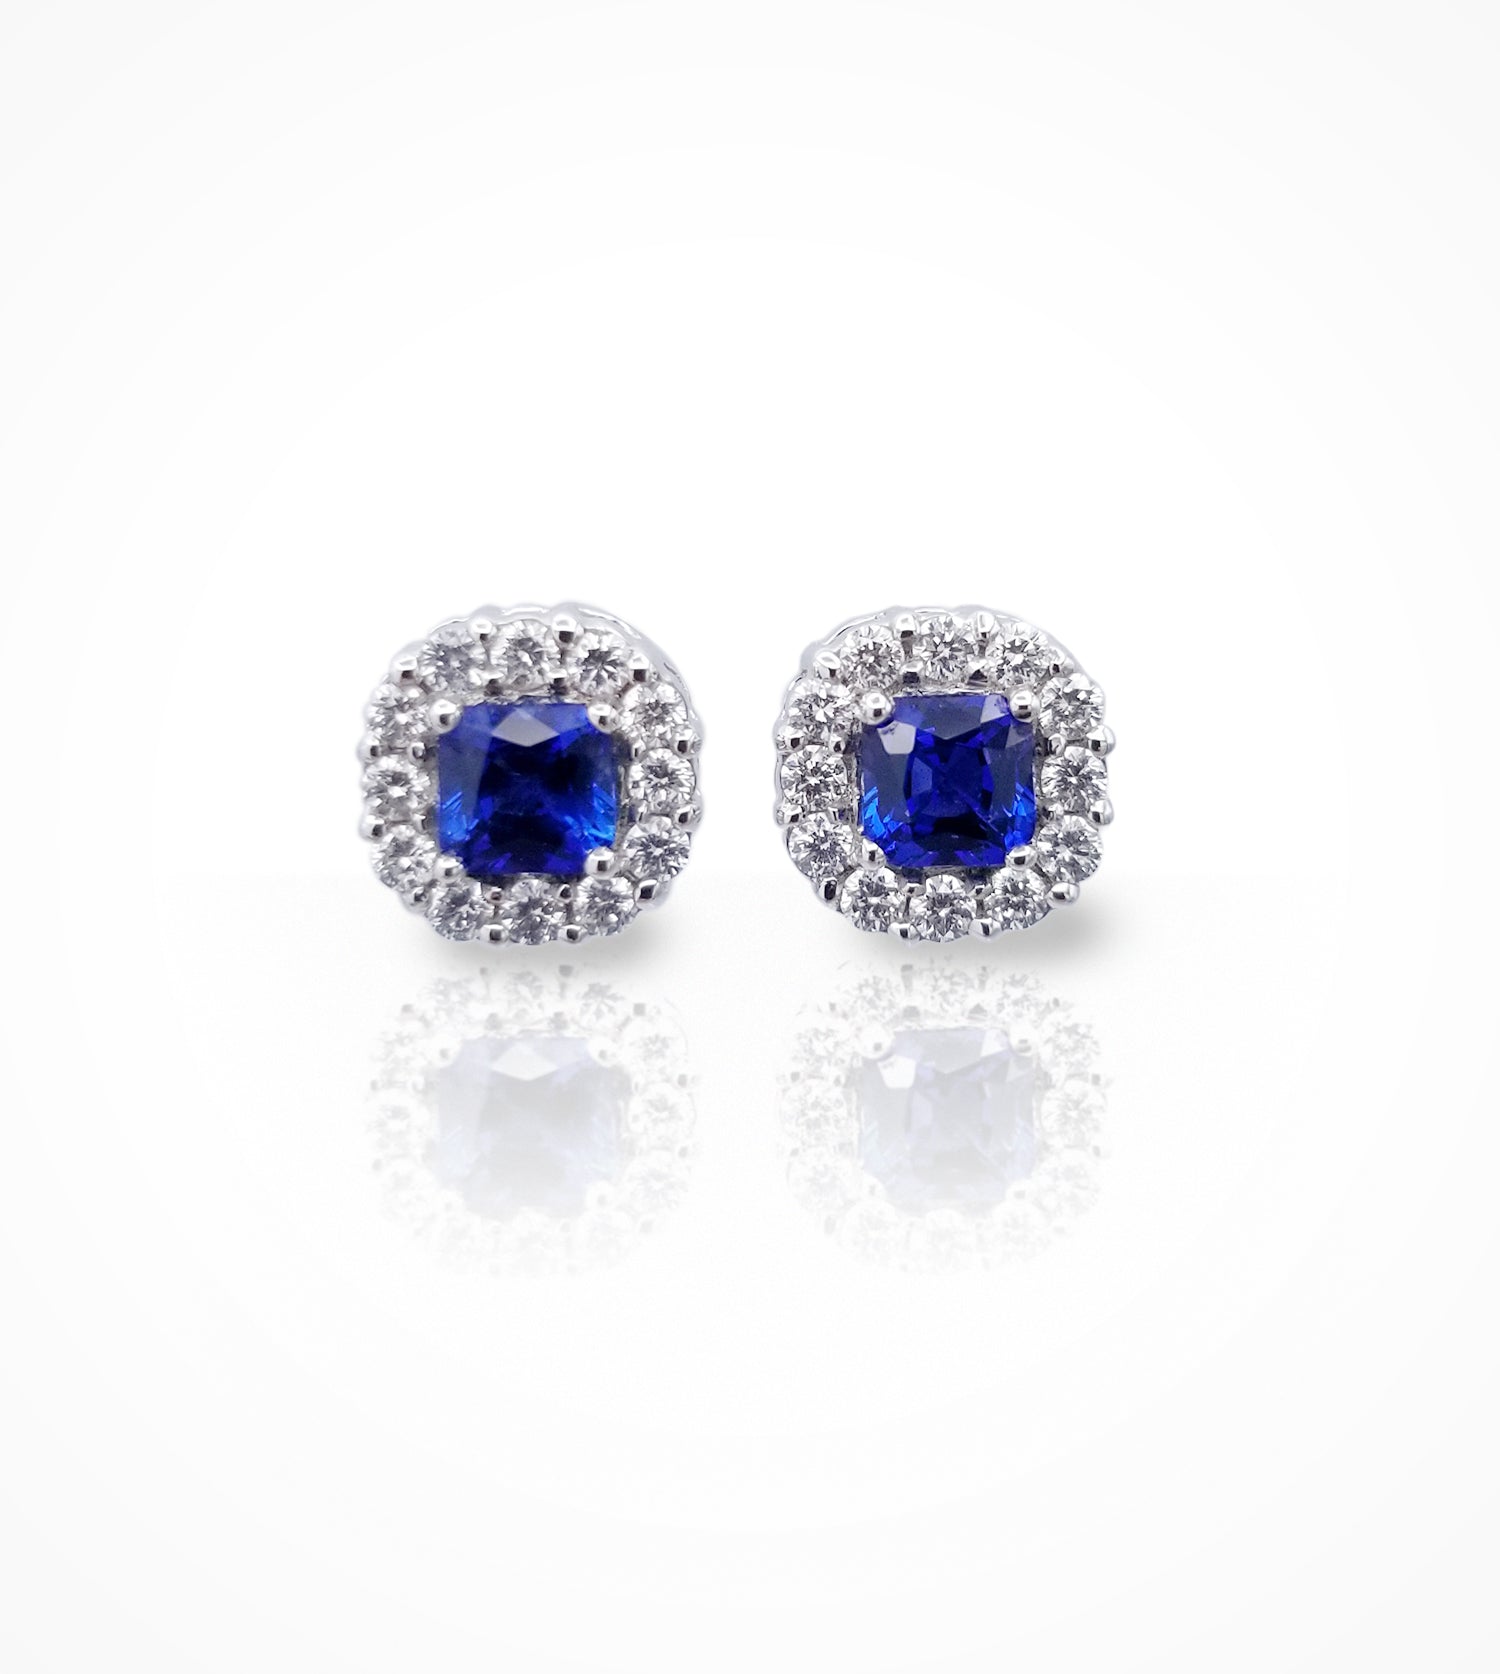 ER00334-18K White gold Sapphire and diamond stud earrings, Diamonds=0.34cts, 2 sapphires=0.68cts